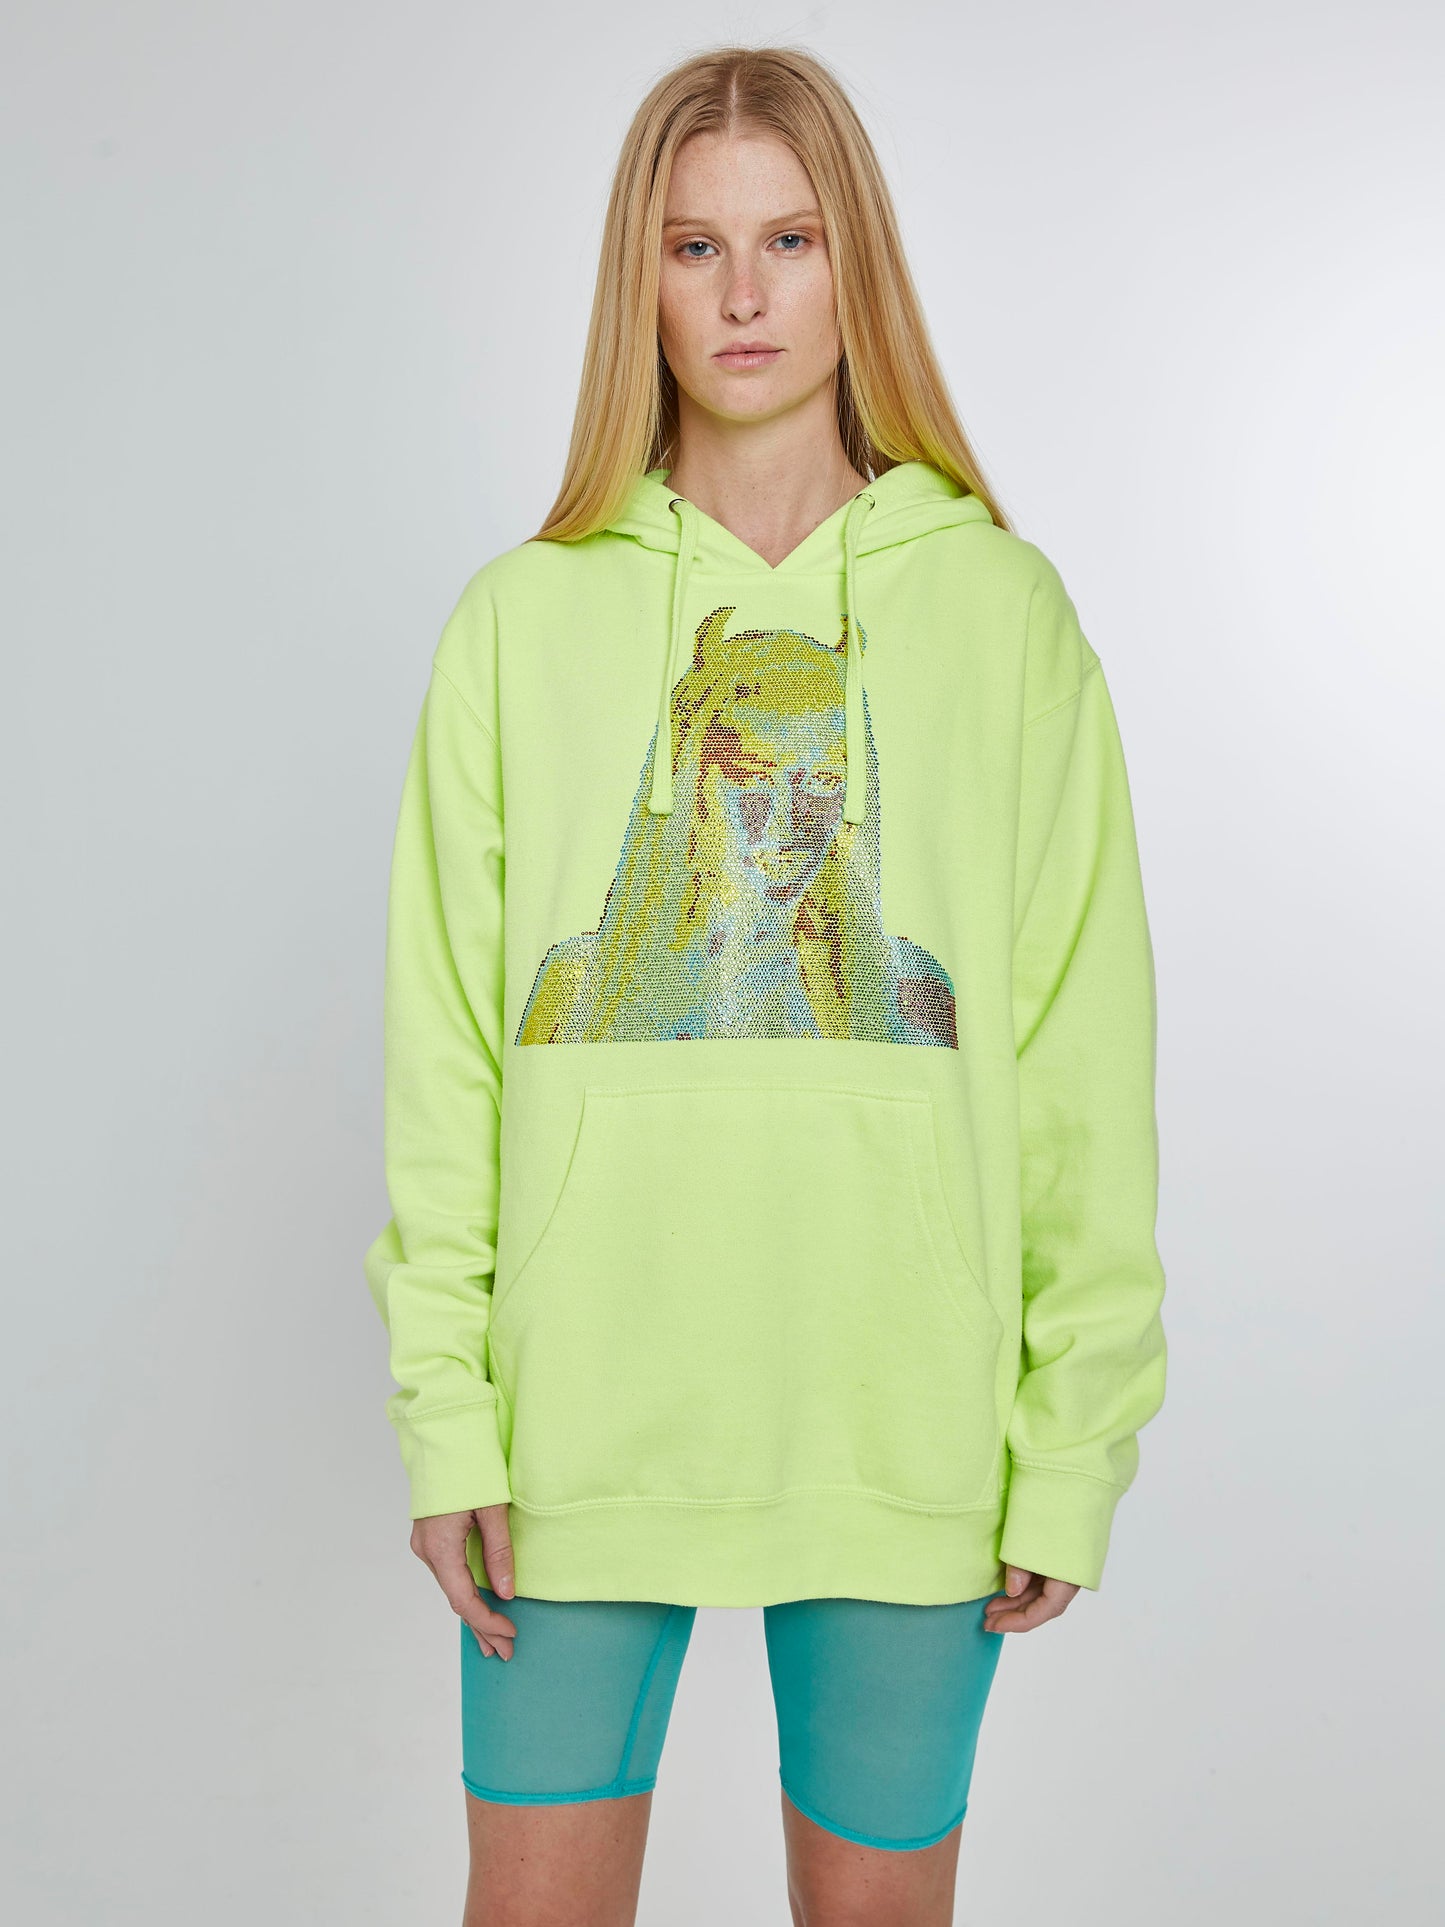 Devil girl neon yellow hoodie with crystals